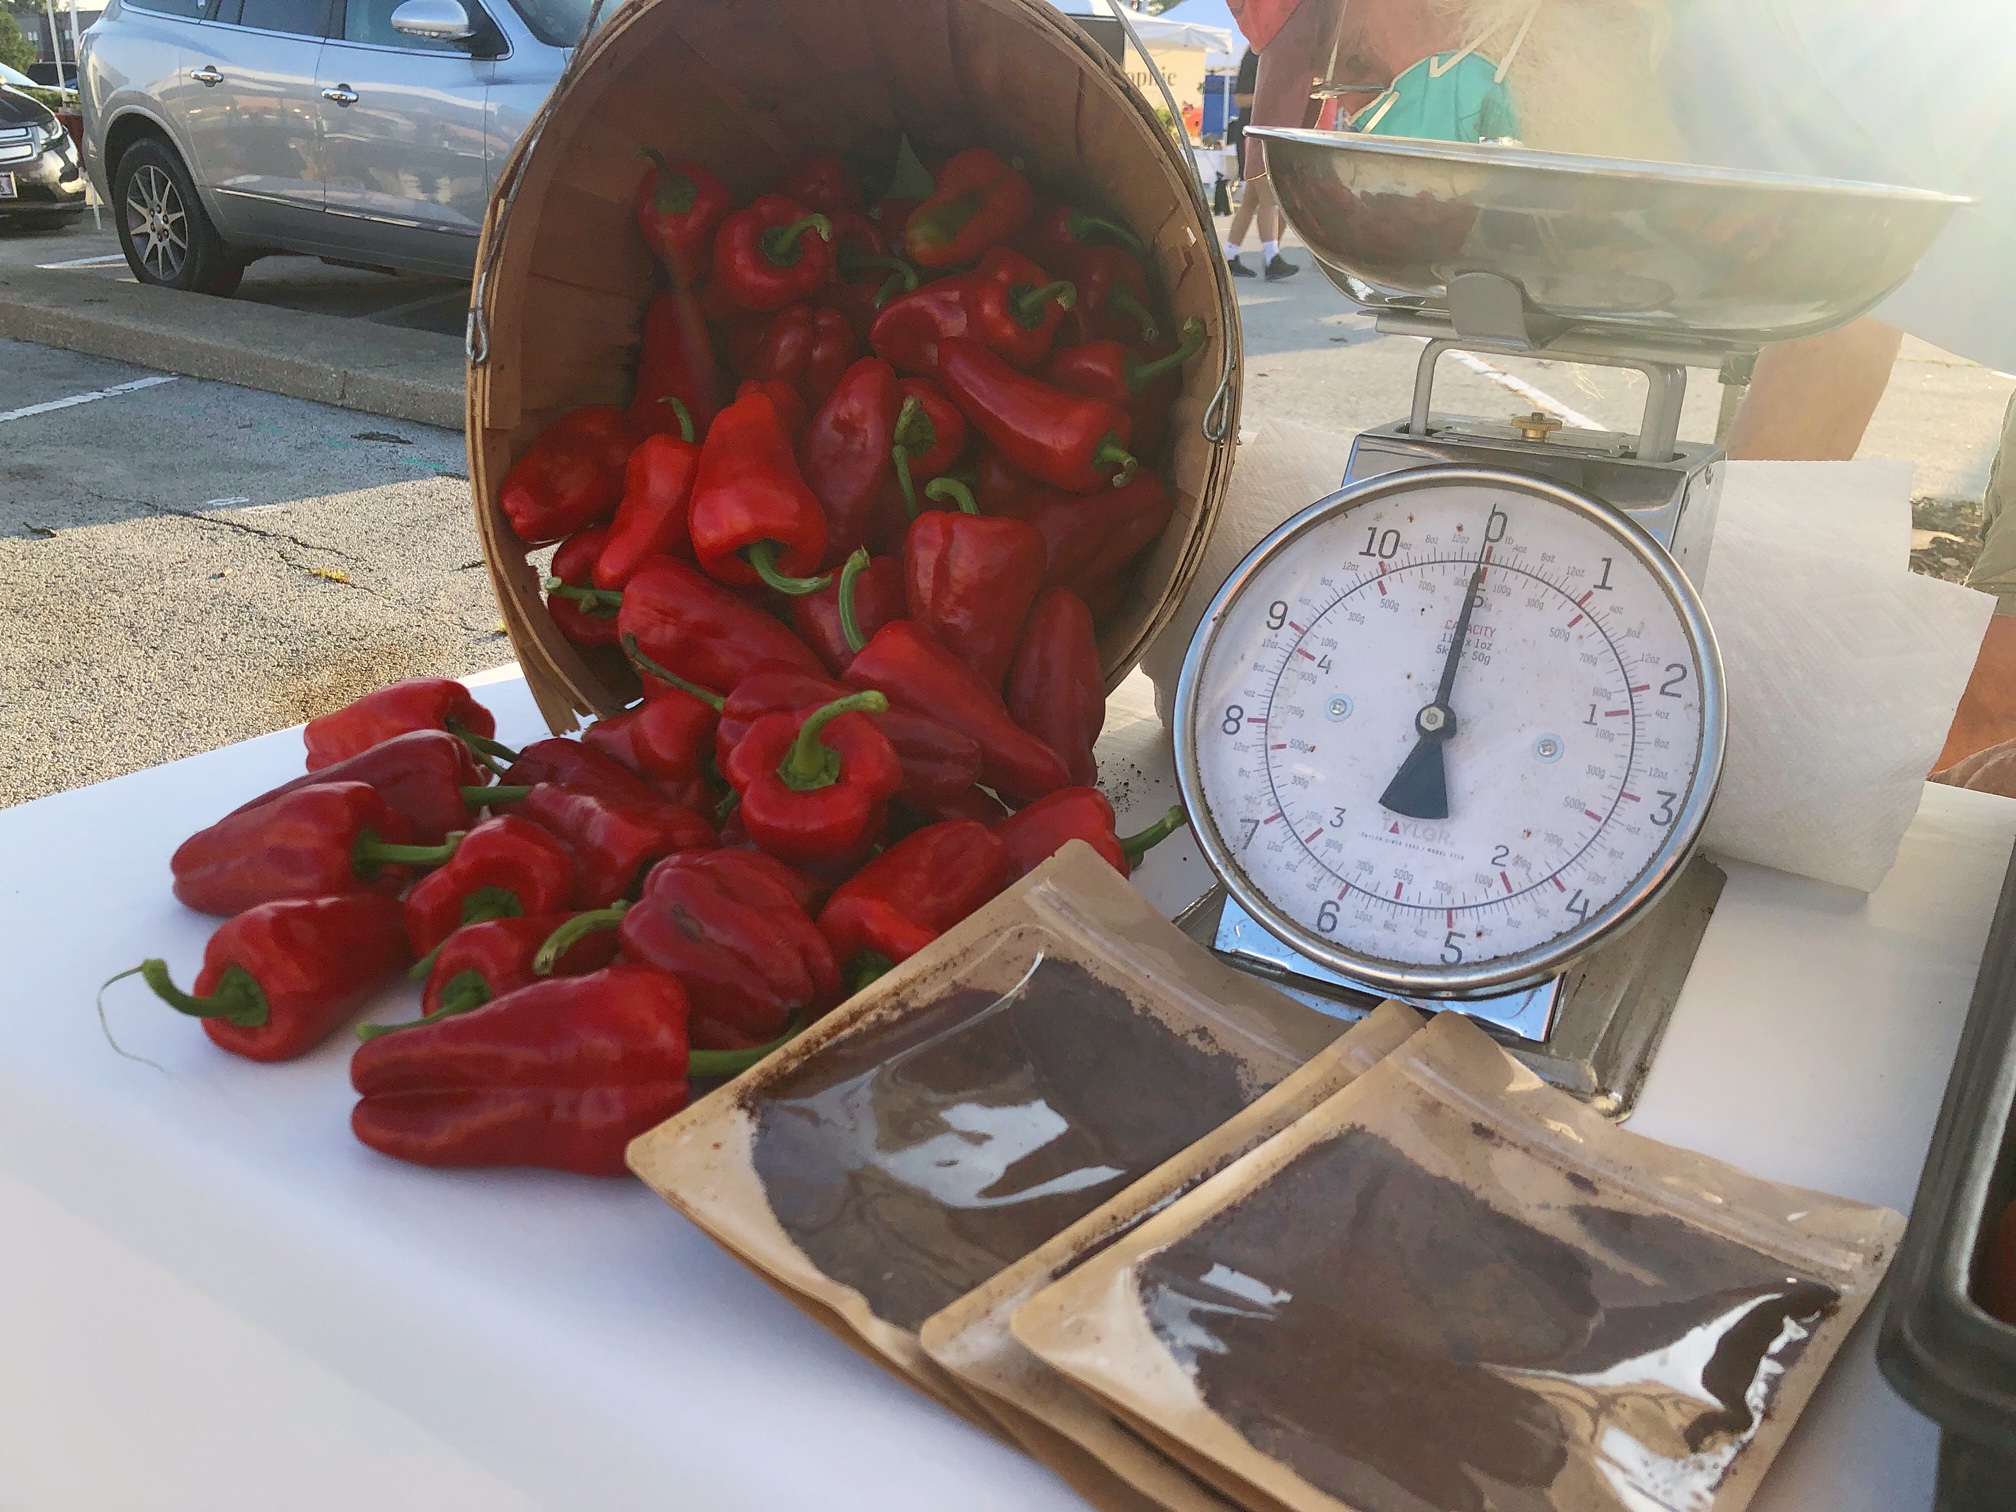 On a white tablecloth, there is an overturned basket of paprika peppers beside clear bags of paprika spice in front of an old fashioned silver scale. Photo by Alyssa Buckley.